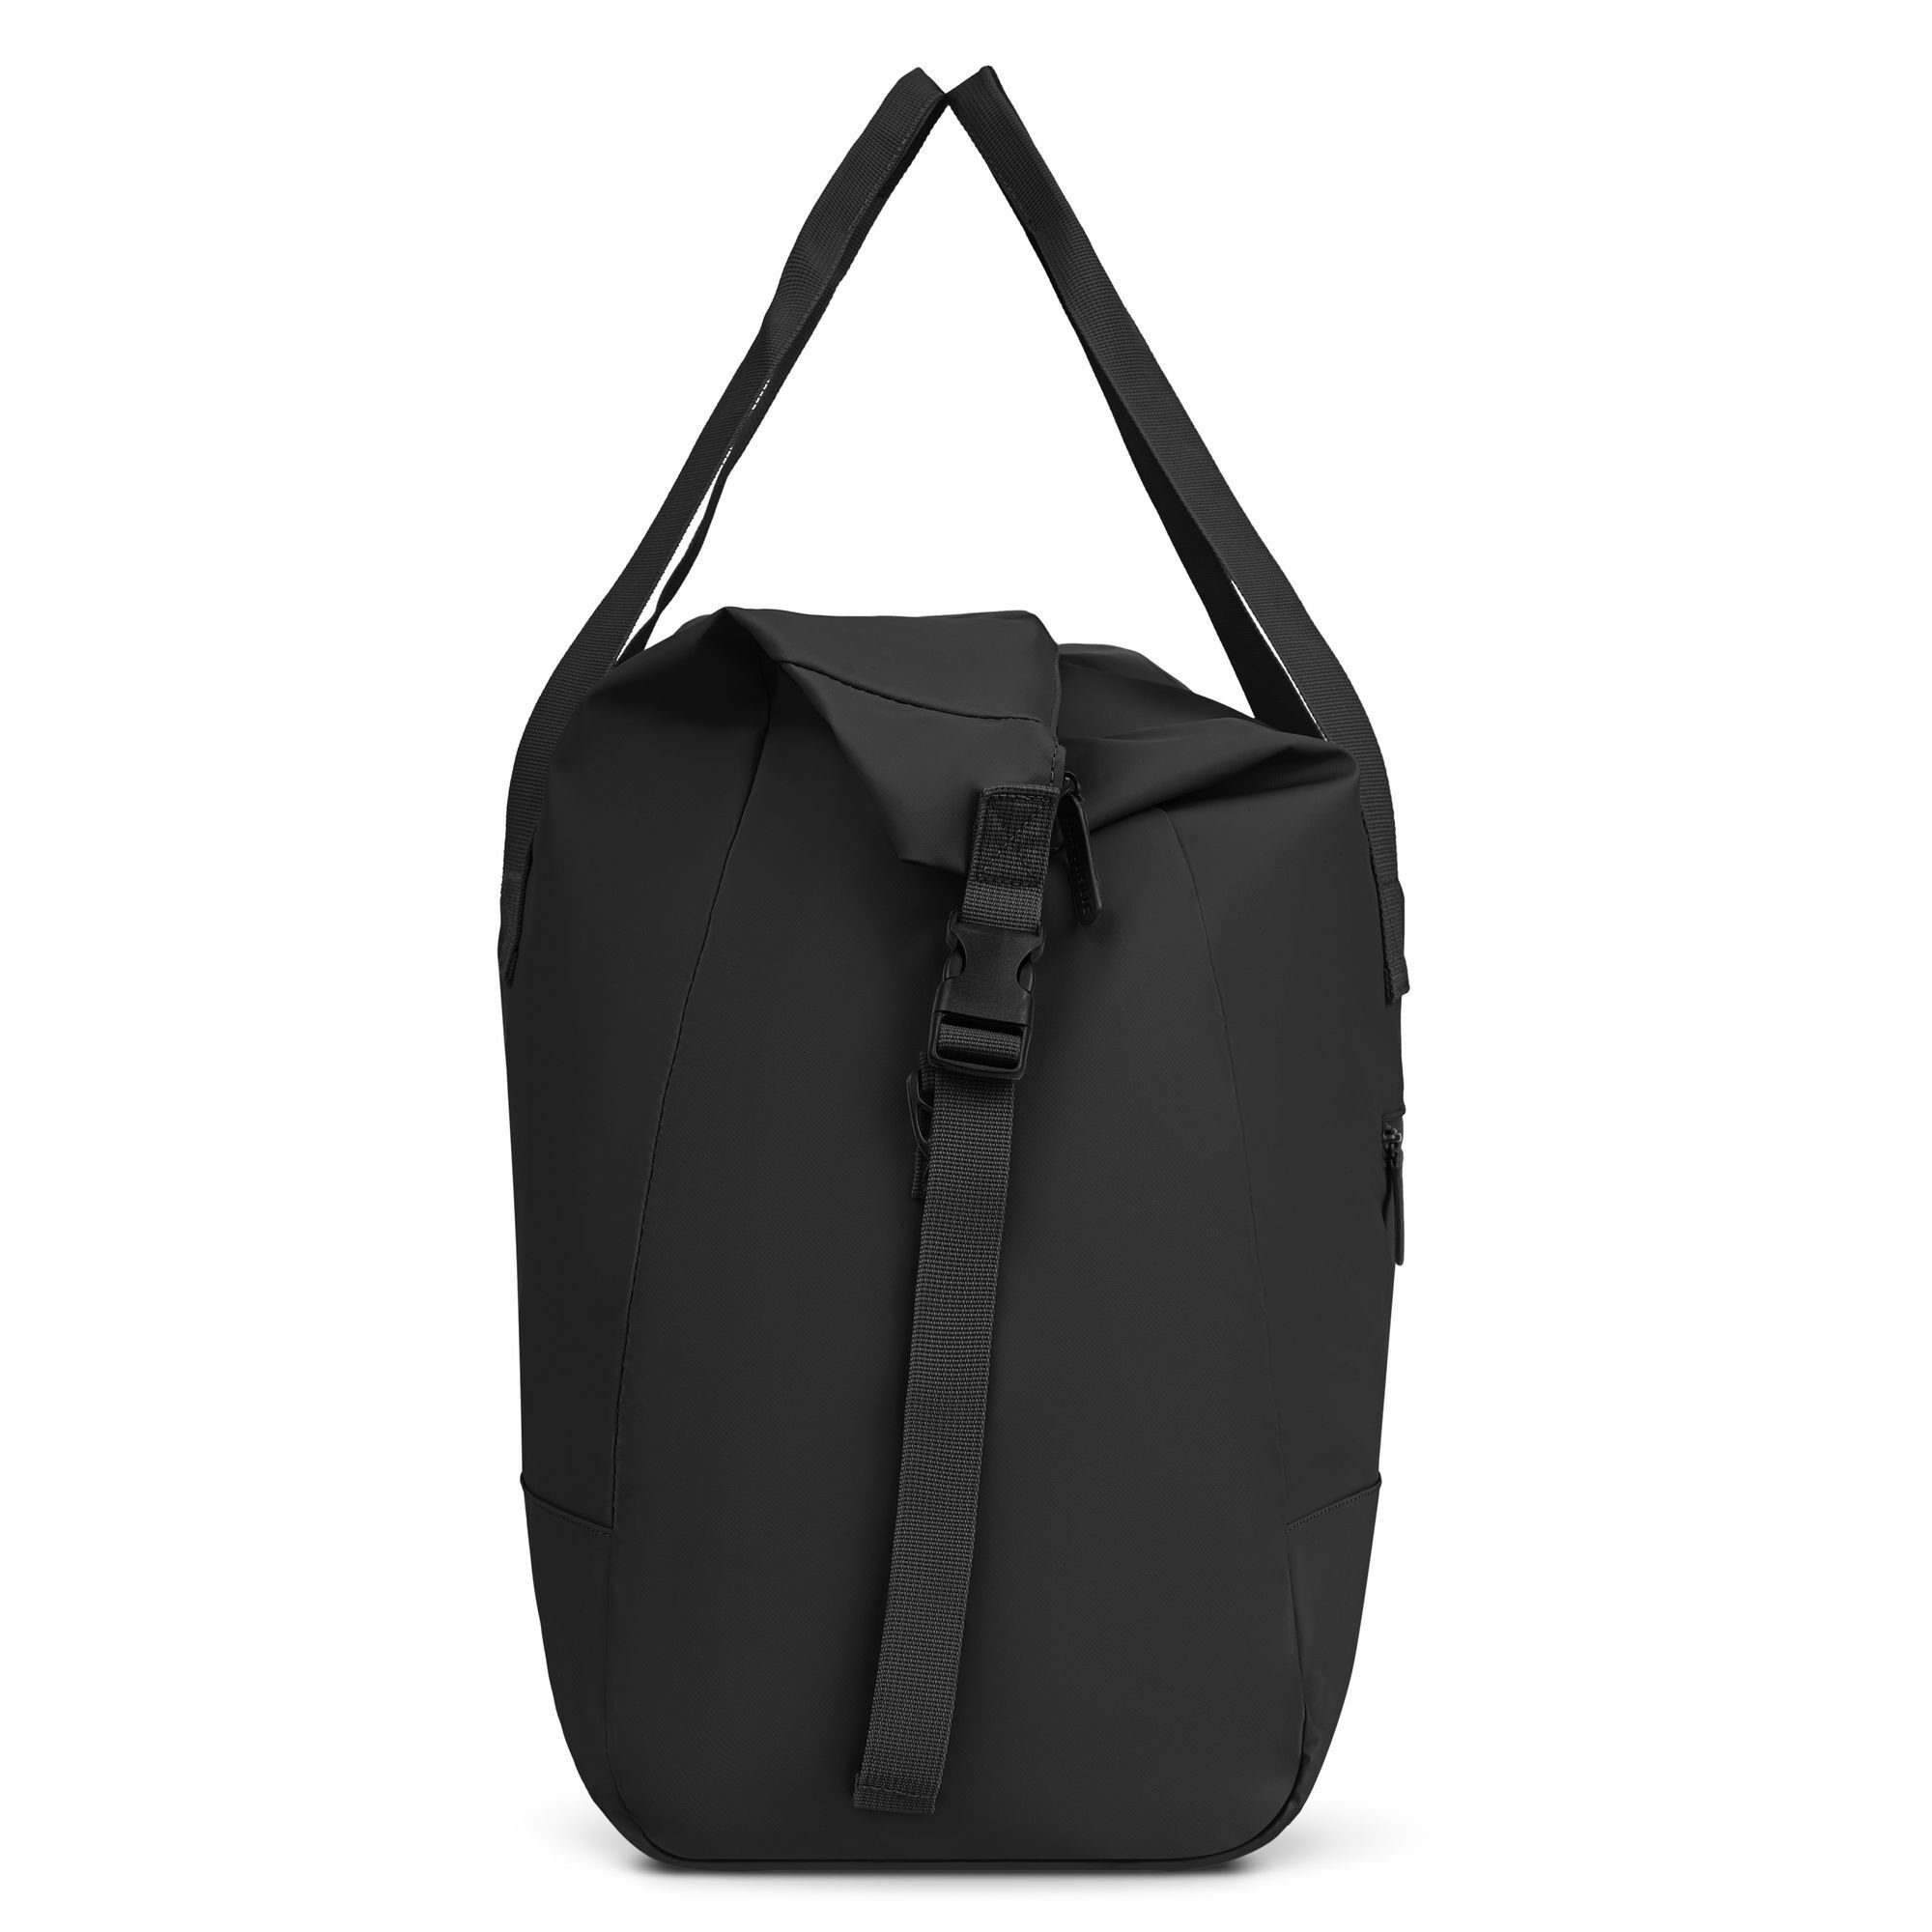 Pactastic Weekender black Urban Collection, Tech-Material Veganes